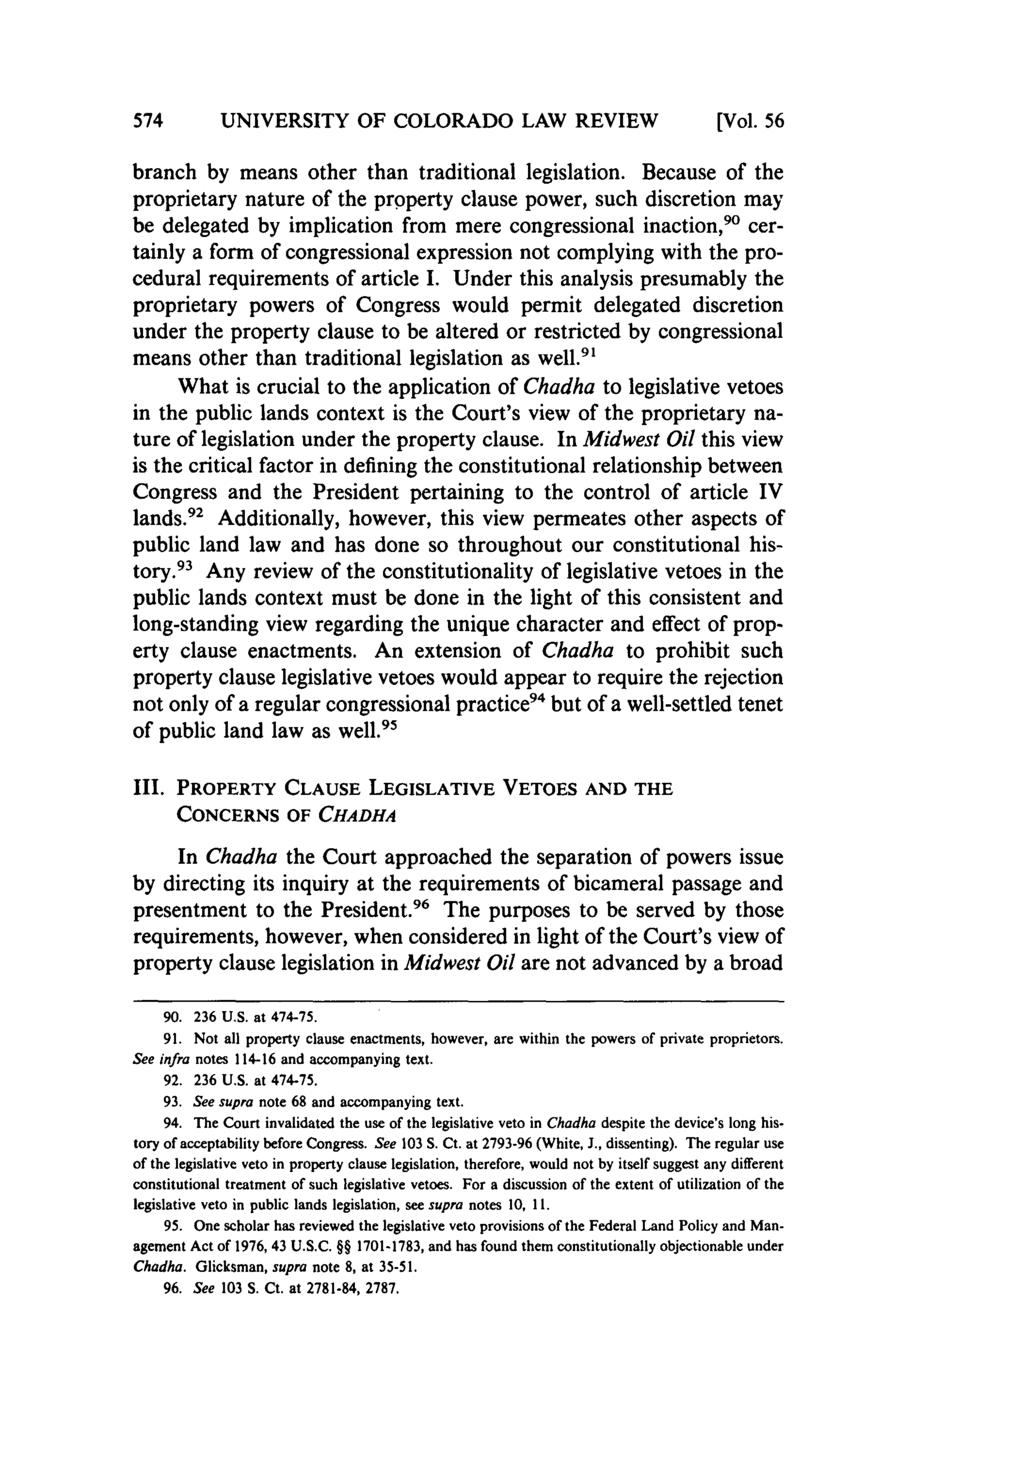 UNIVERSITY OF COLORADO LAW REVIEW [Vol. 56 branch by means other than traditional legislation.